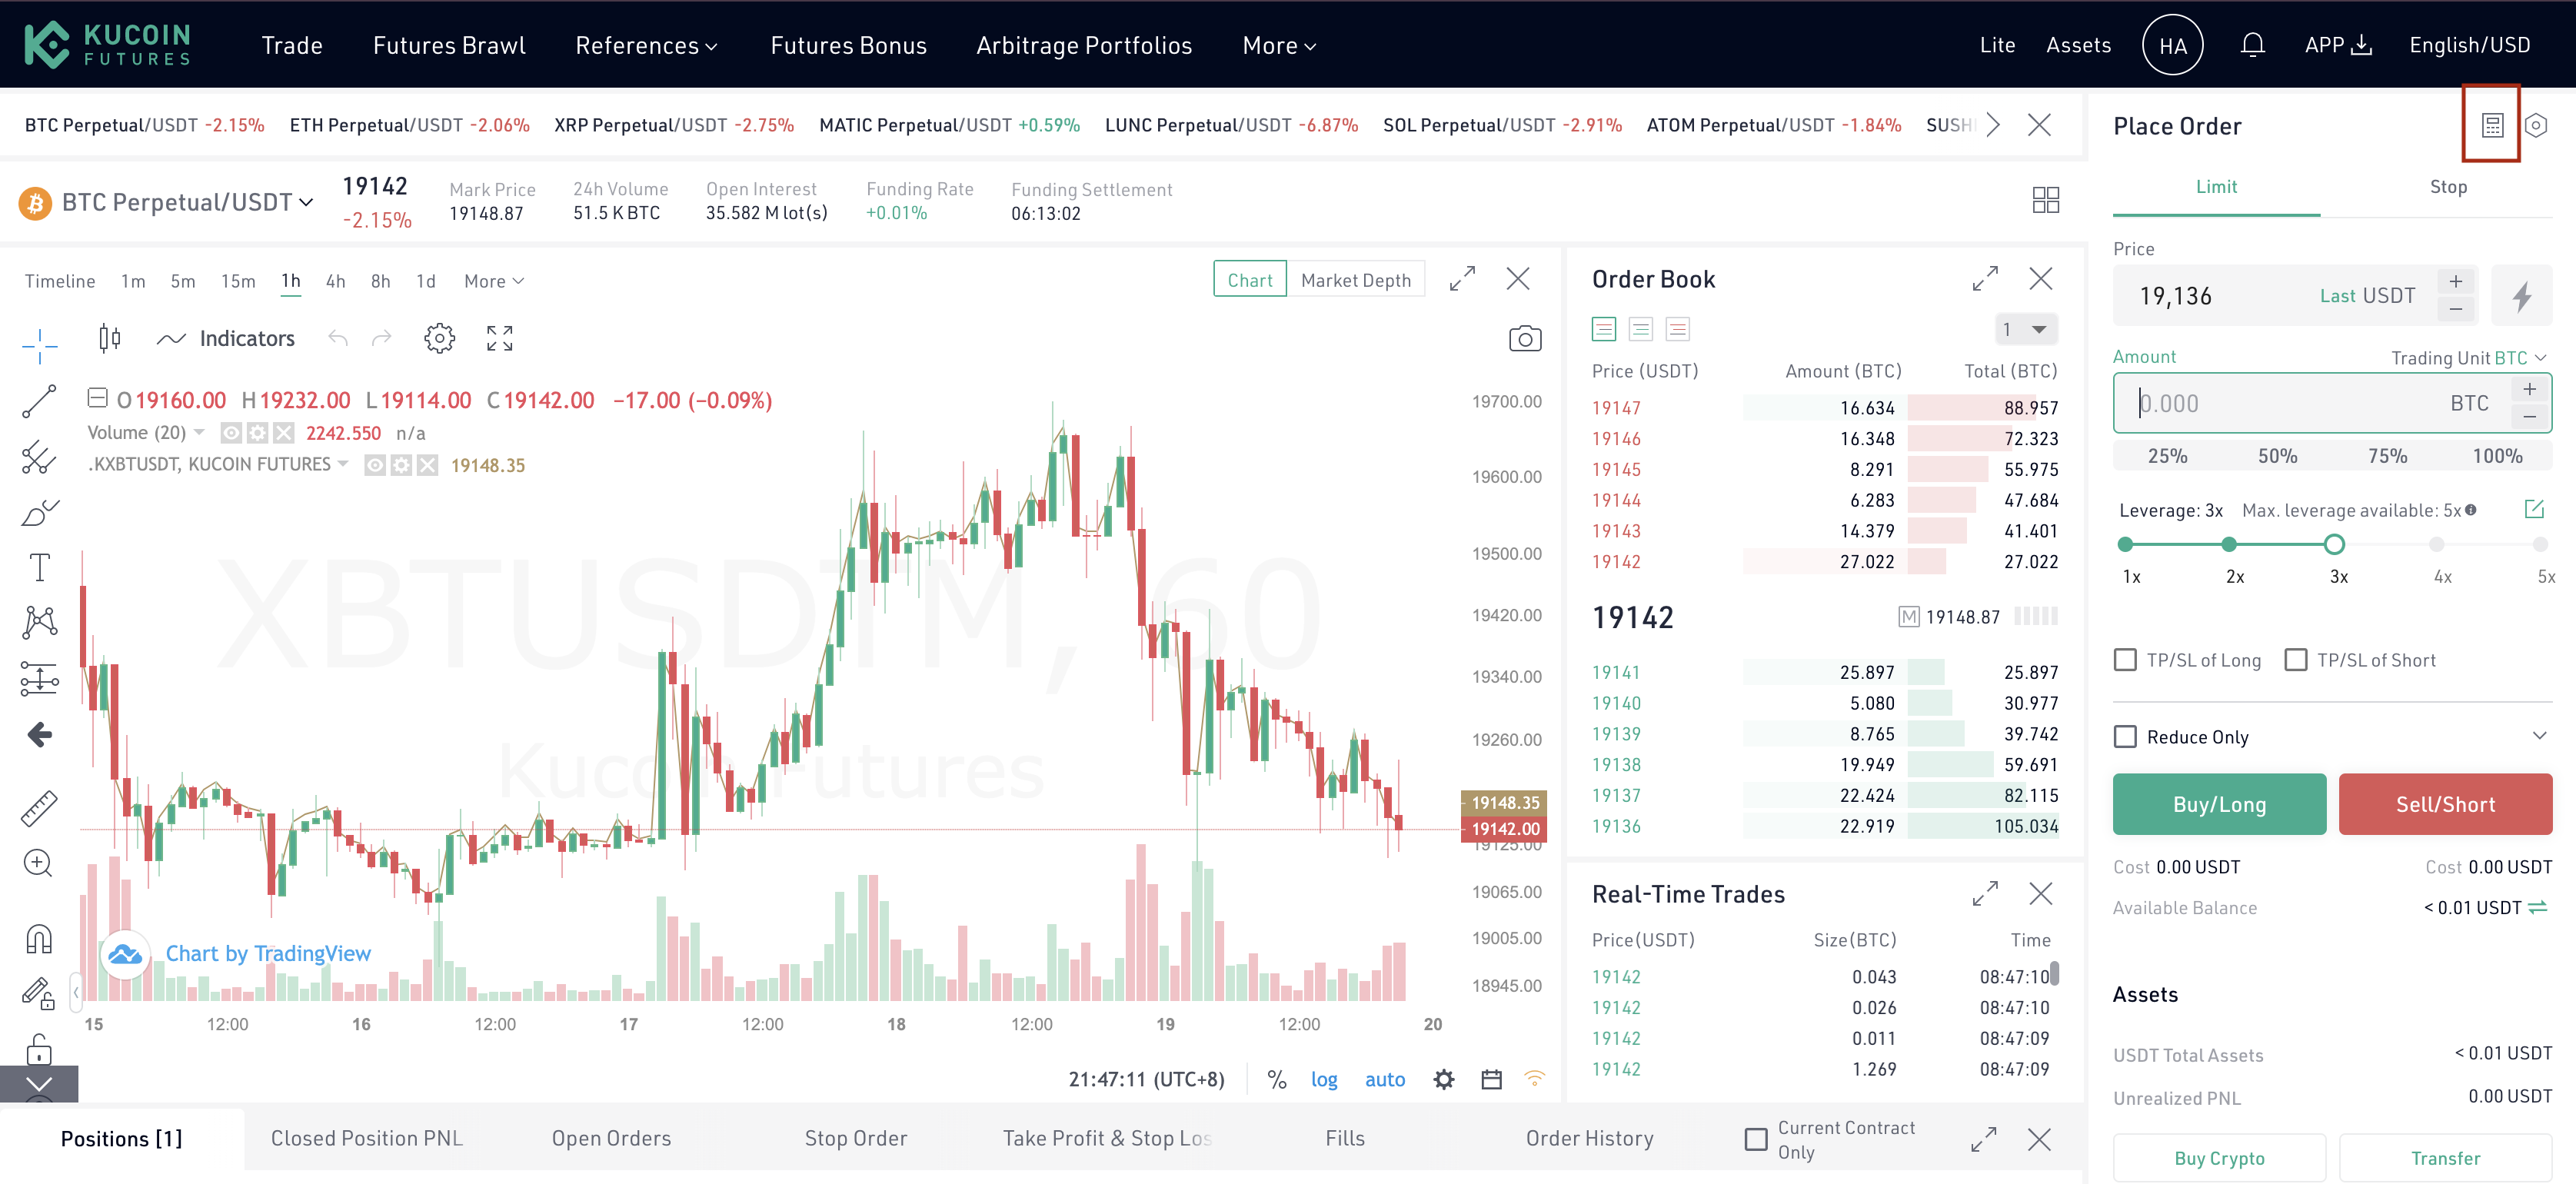 Shorting Crypto: How to Short Cryptocurrency on Exchanges